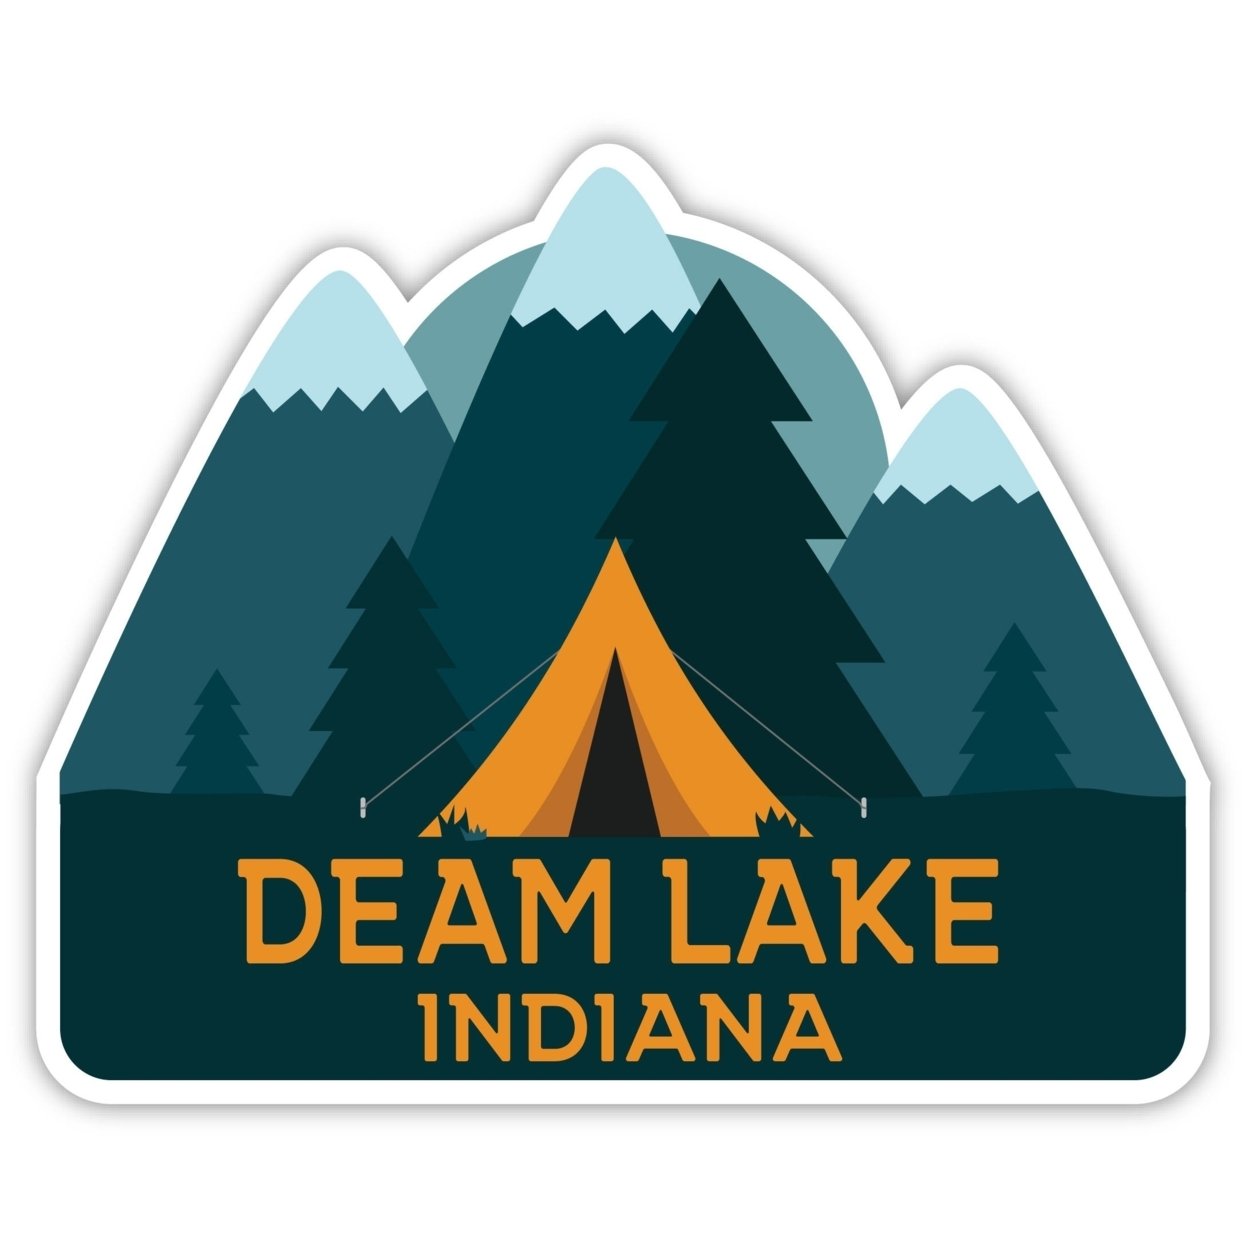 Deam Lake Indiana Souvenir Decorative Stickers (Choose Theme And Size) - 4-Pack, 12-Inch, Tent